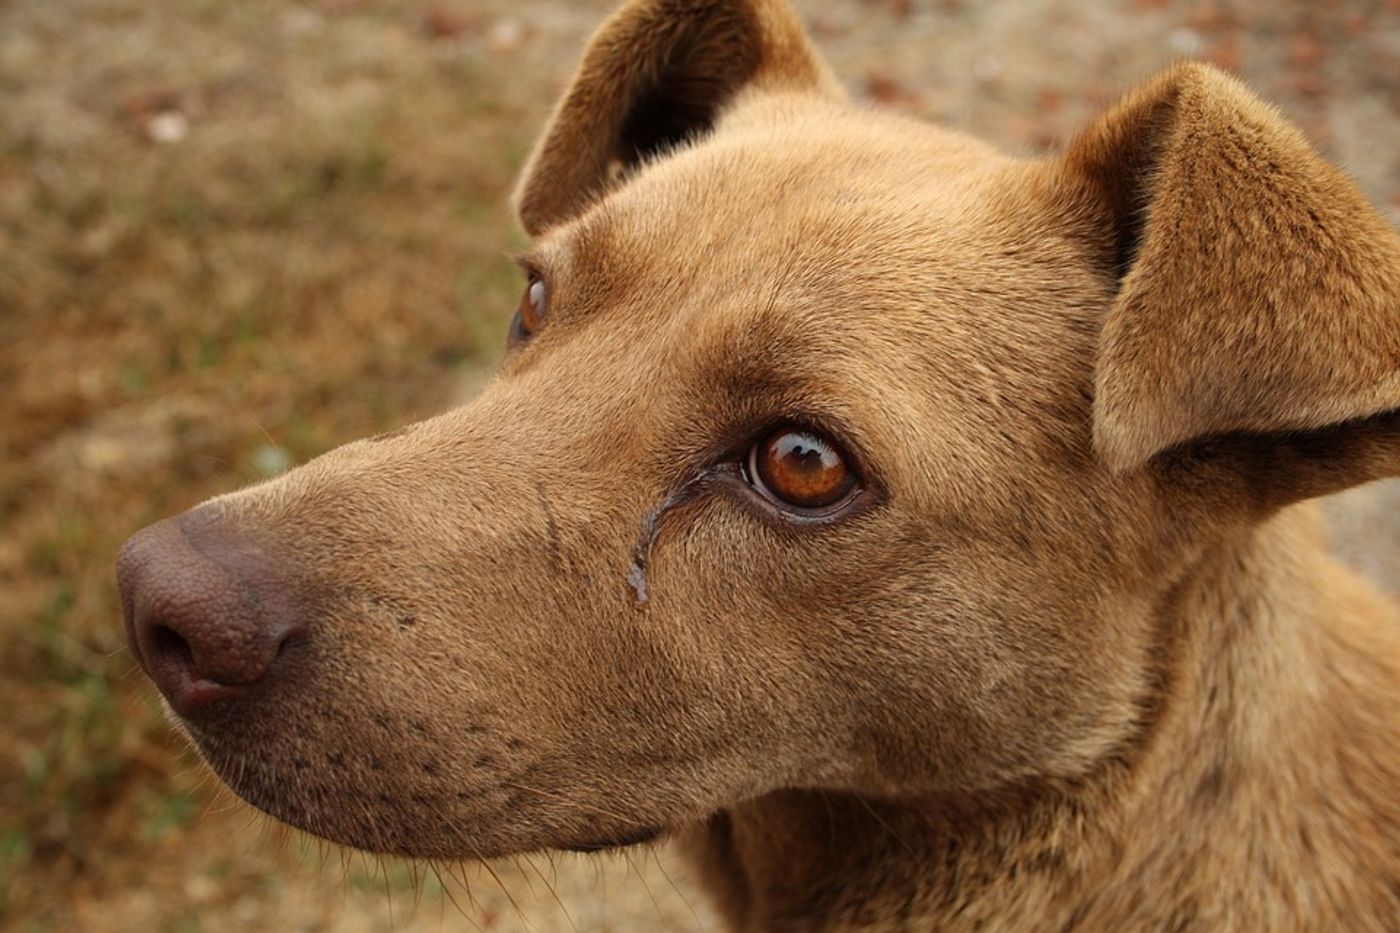 Researchers hope that this vaccine could prevent cancers in dogs. Photo: Pixabay